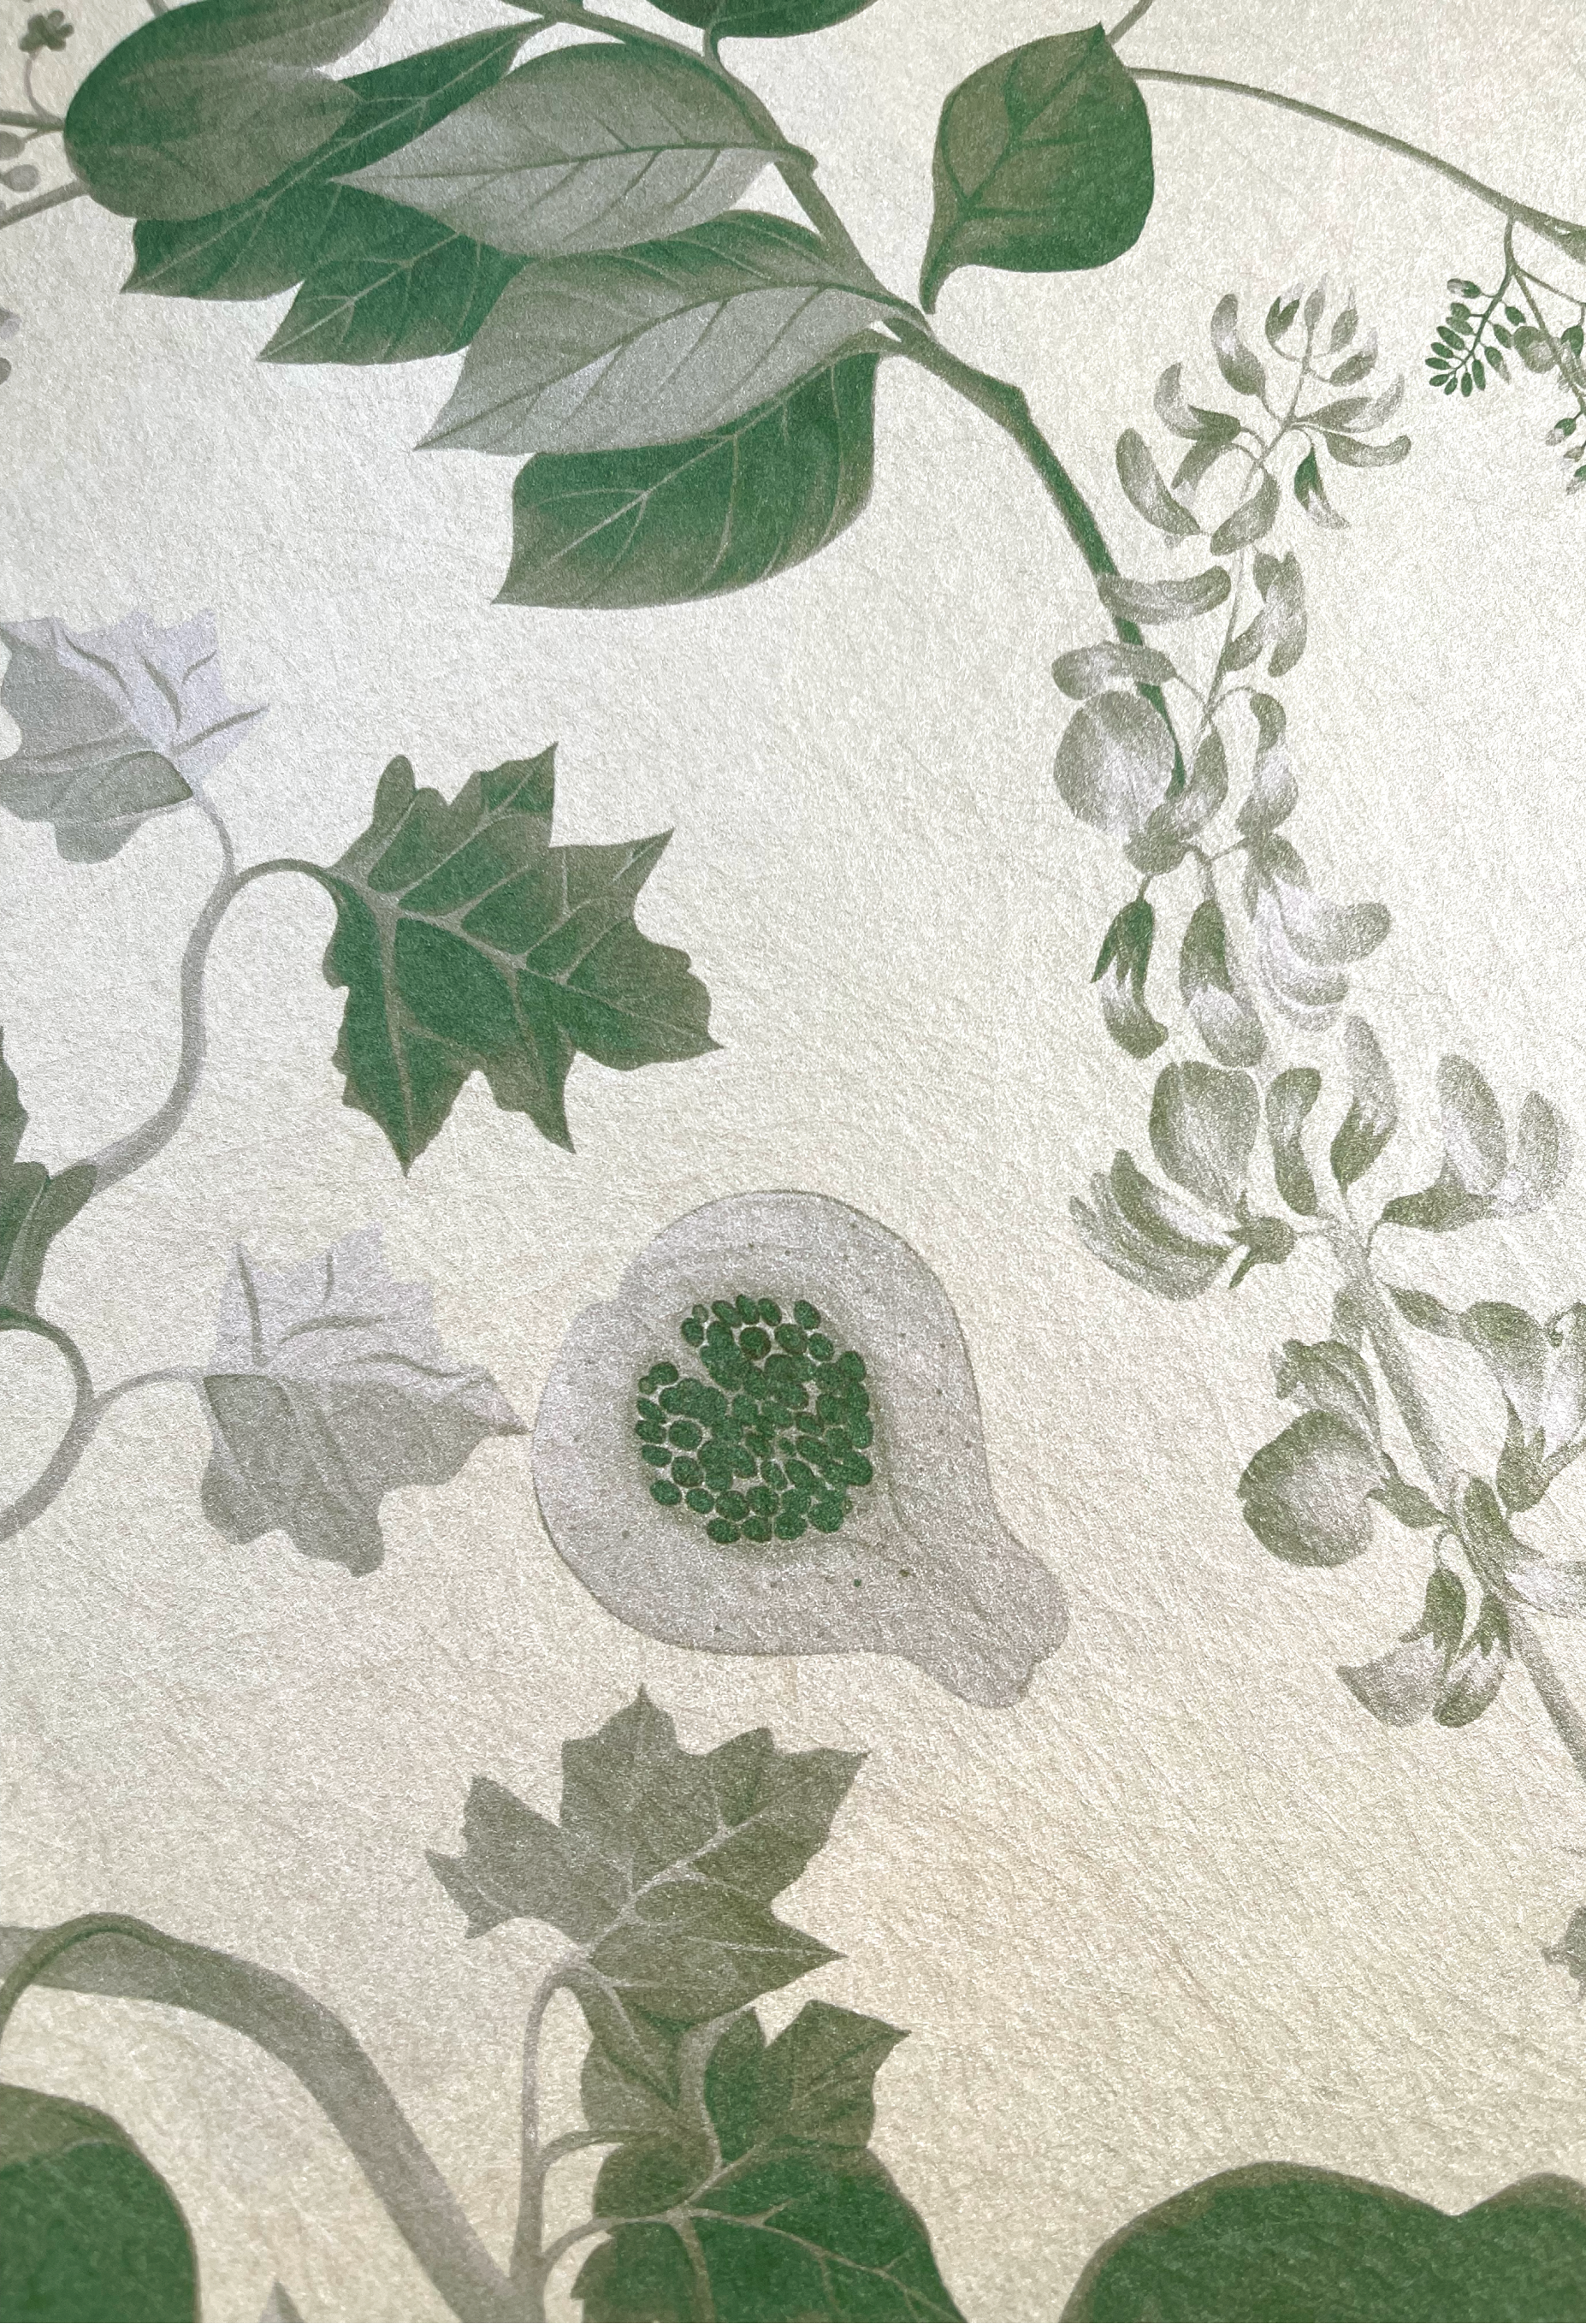 Illustrated fruit with florals and green leaves on luxury wallpaper by Deus ex Gardenia of Eden in Fern.